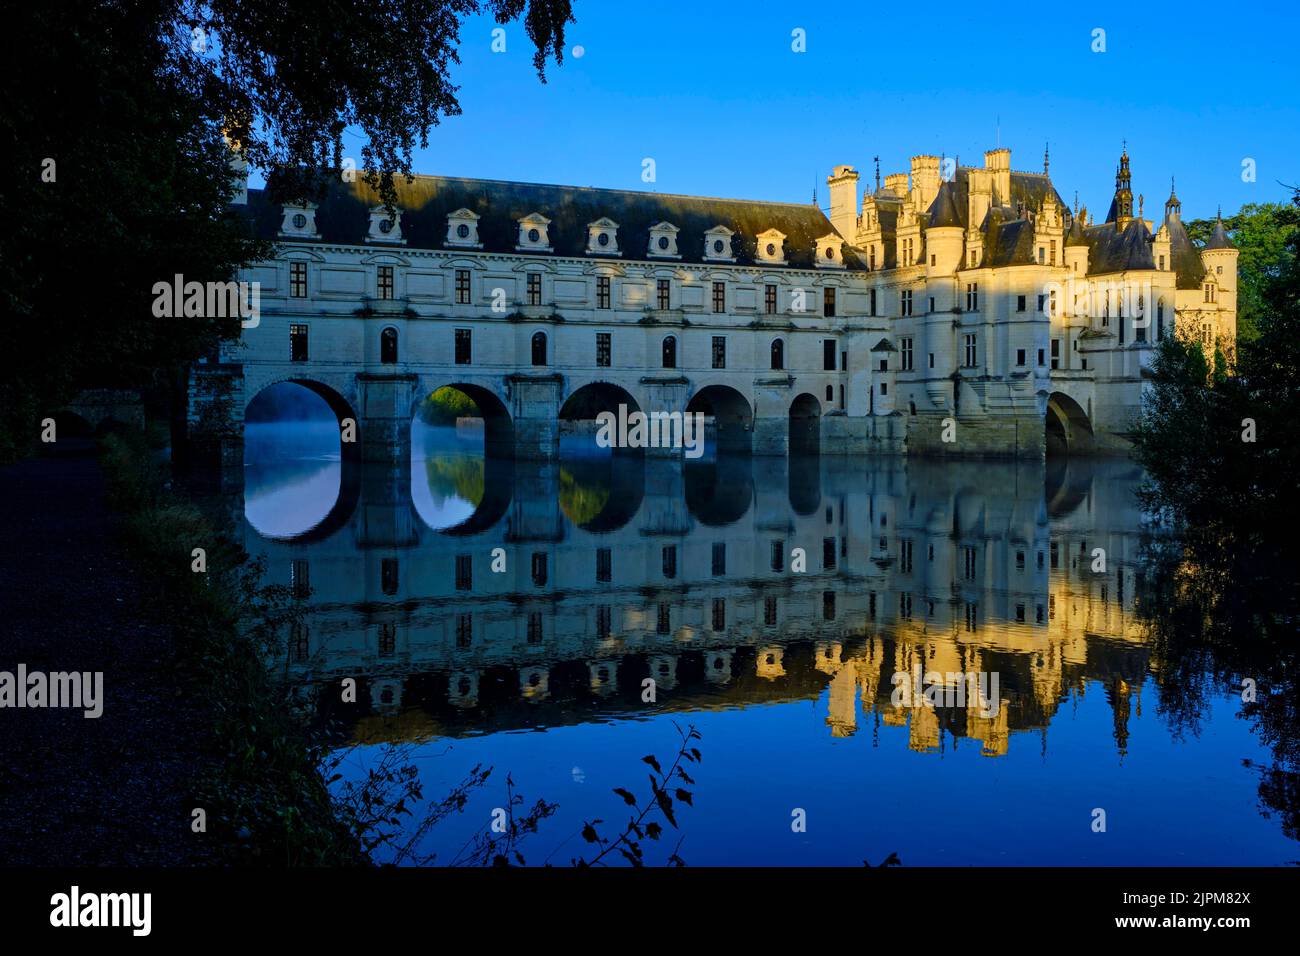 France, Indre et Loire, Chenonceaux, Château de Chenonceau listed as World Heritage by UNESCO, built from 1513 to 1521 in Renaissance style Stock Photo